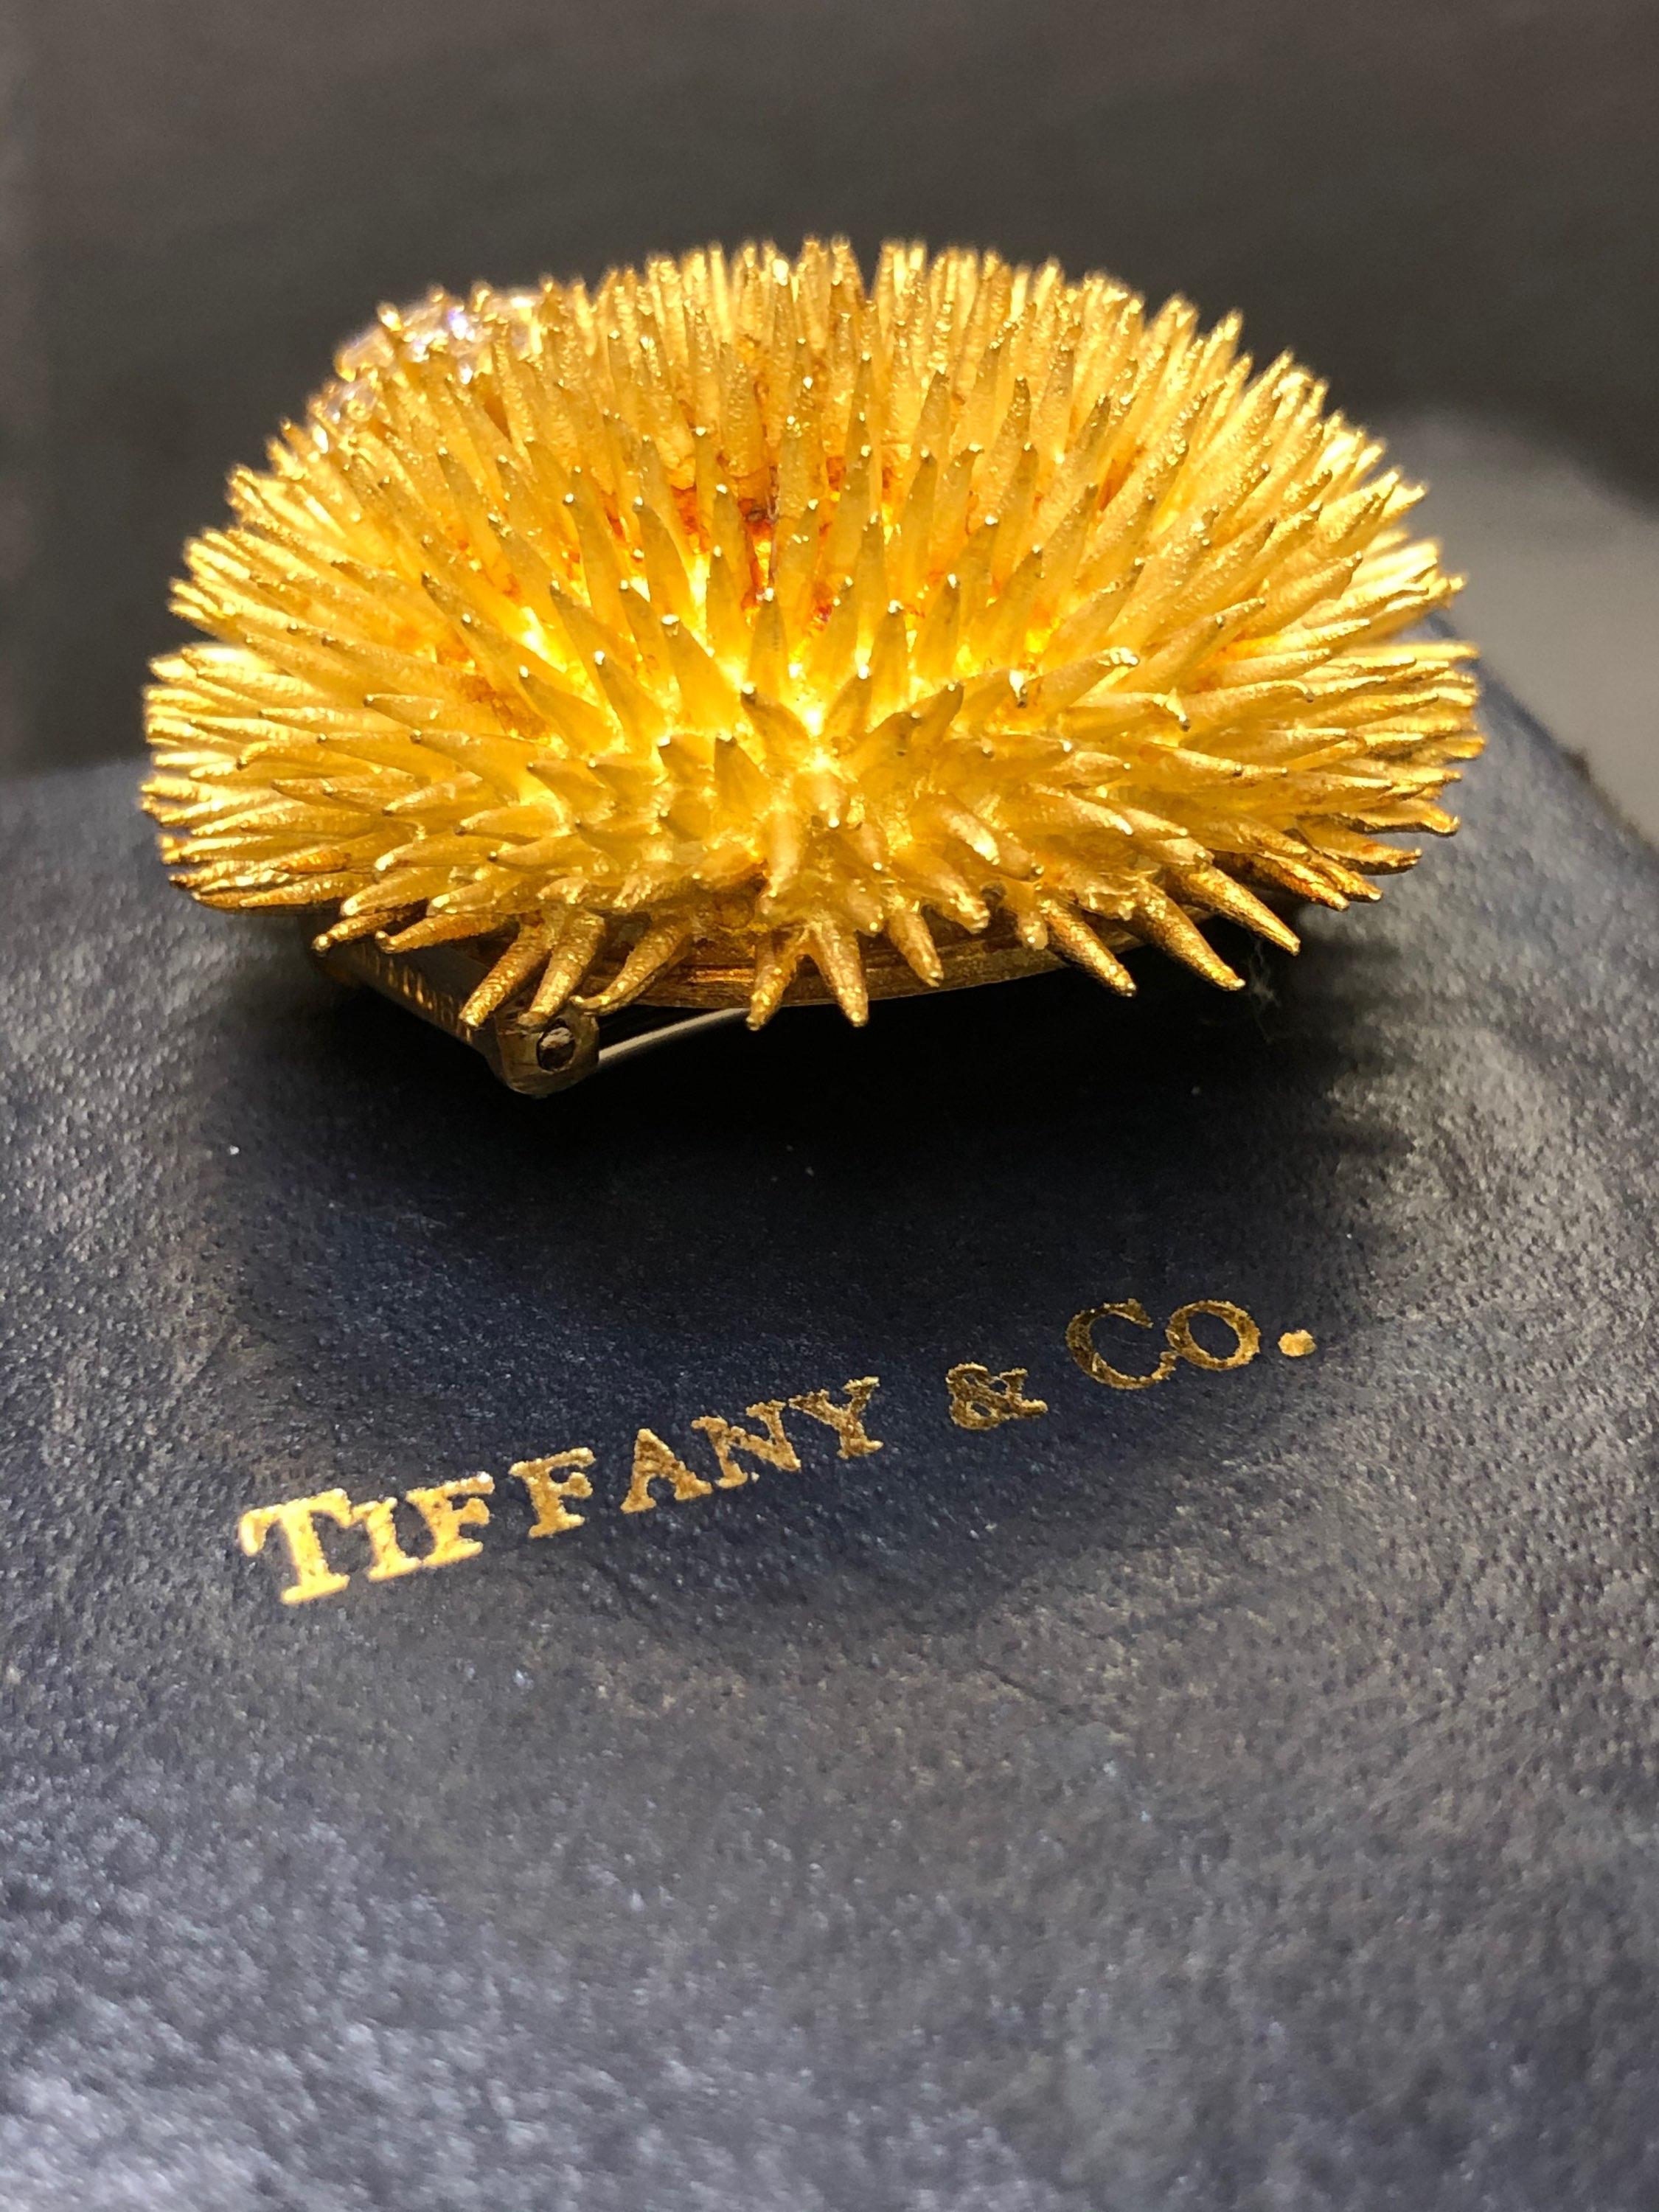 Here is a very hard-to-find piece of Tiffany & Company jewelry. This large size sea urchin brooch is circa 1960’s and from their very well known collection. The rarity in this one is that the section of gemstones is all diamond and completely